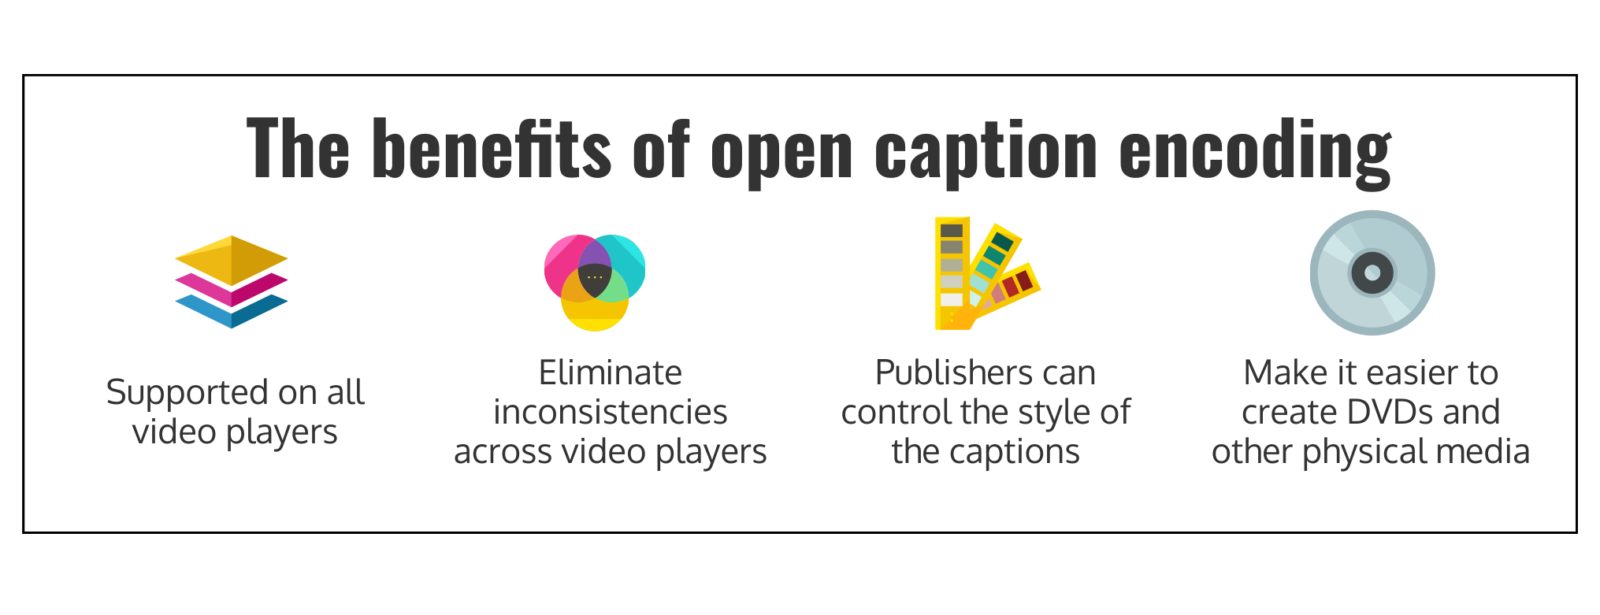 The benefits of caption encoding Eliminate inconsistencies across video players Publishers can control the style of the captions Supported on all video players because they are part of the video Make it easier to create DVDs and other physical media